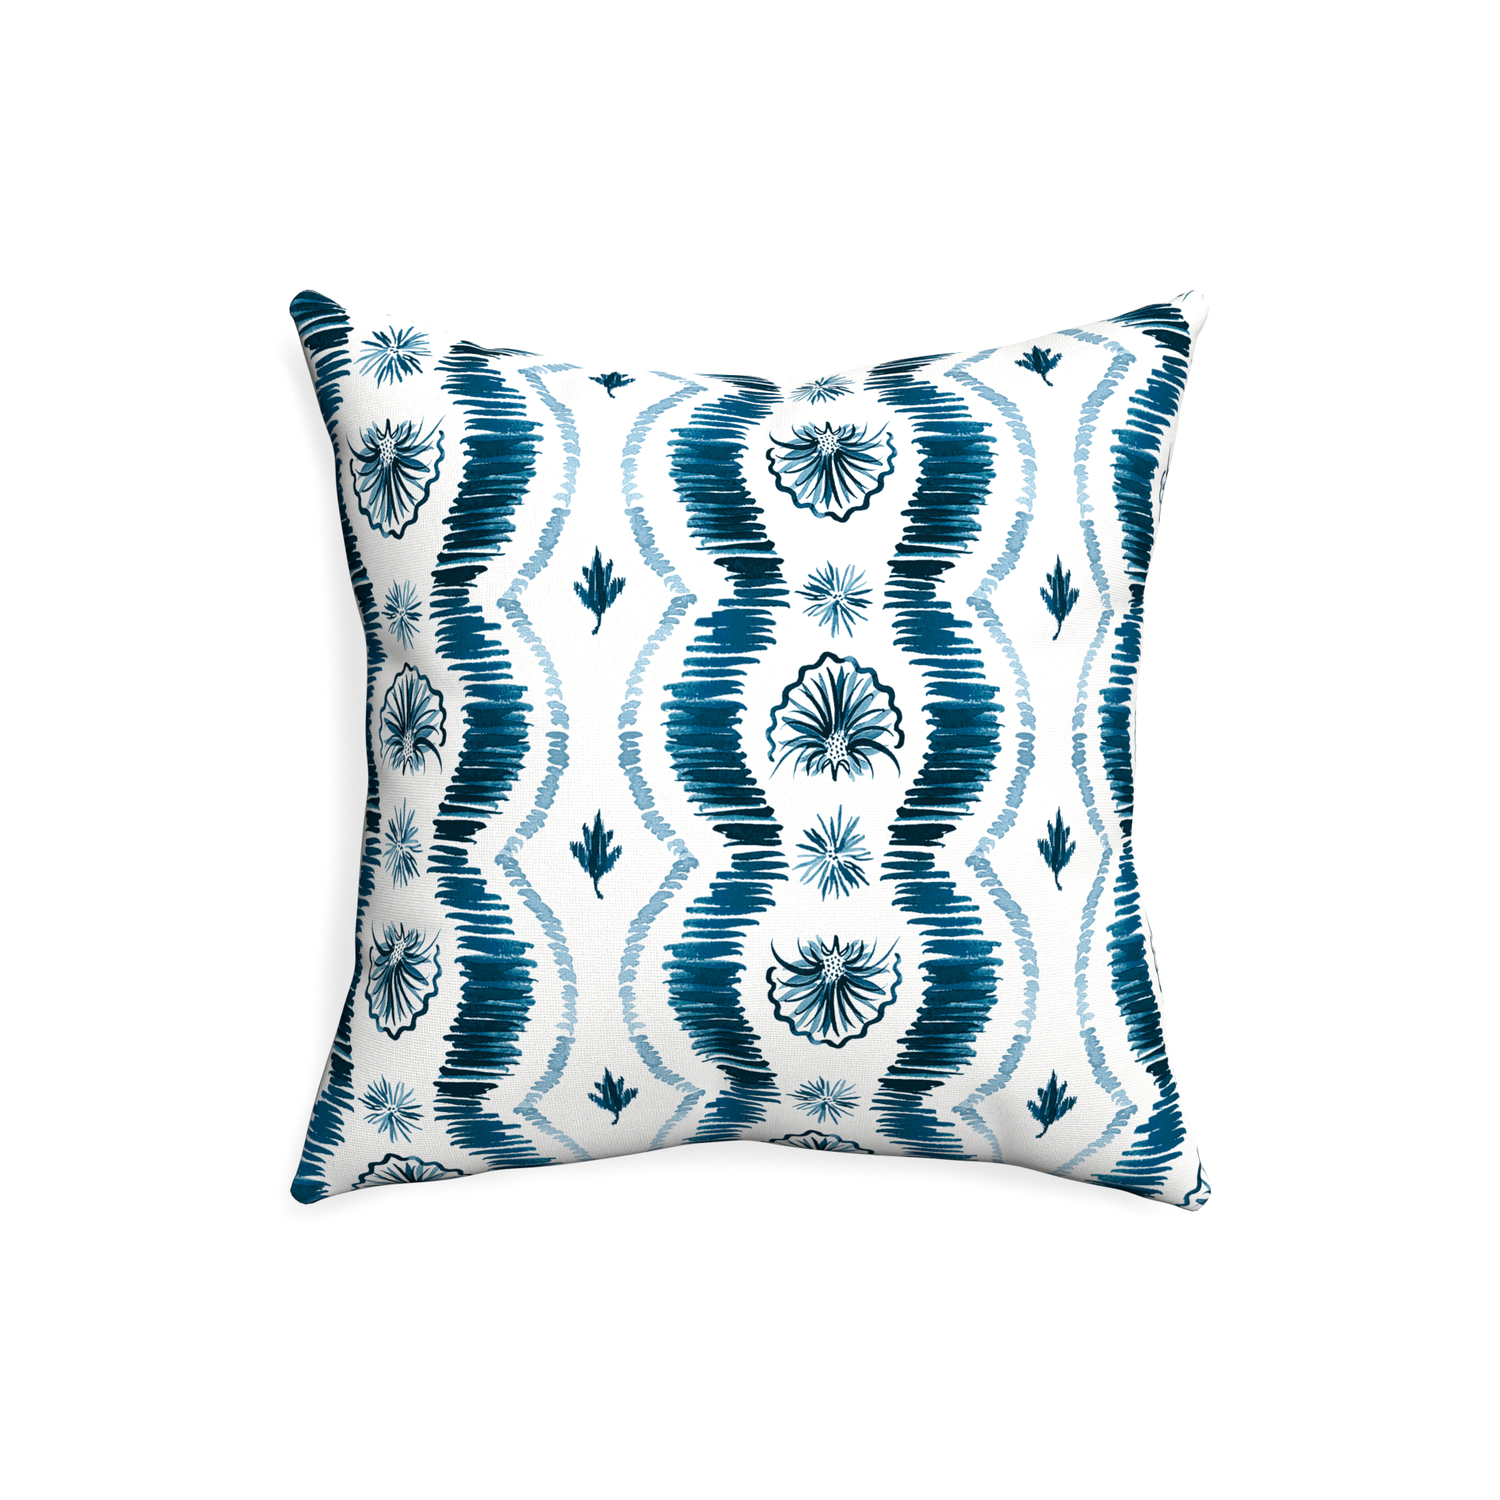 20-square alice custom blue ikatpillow with none on white background